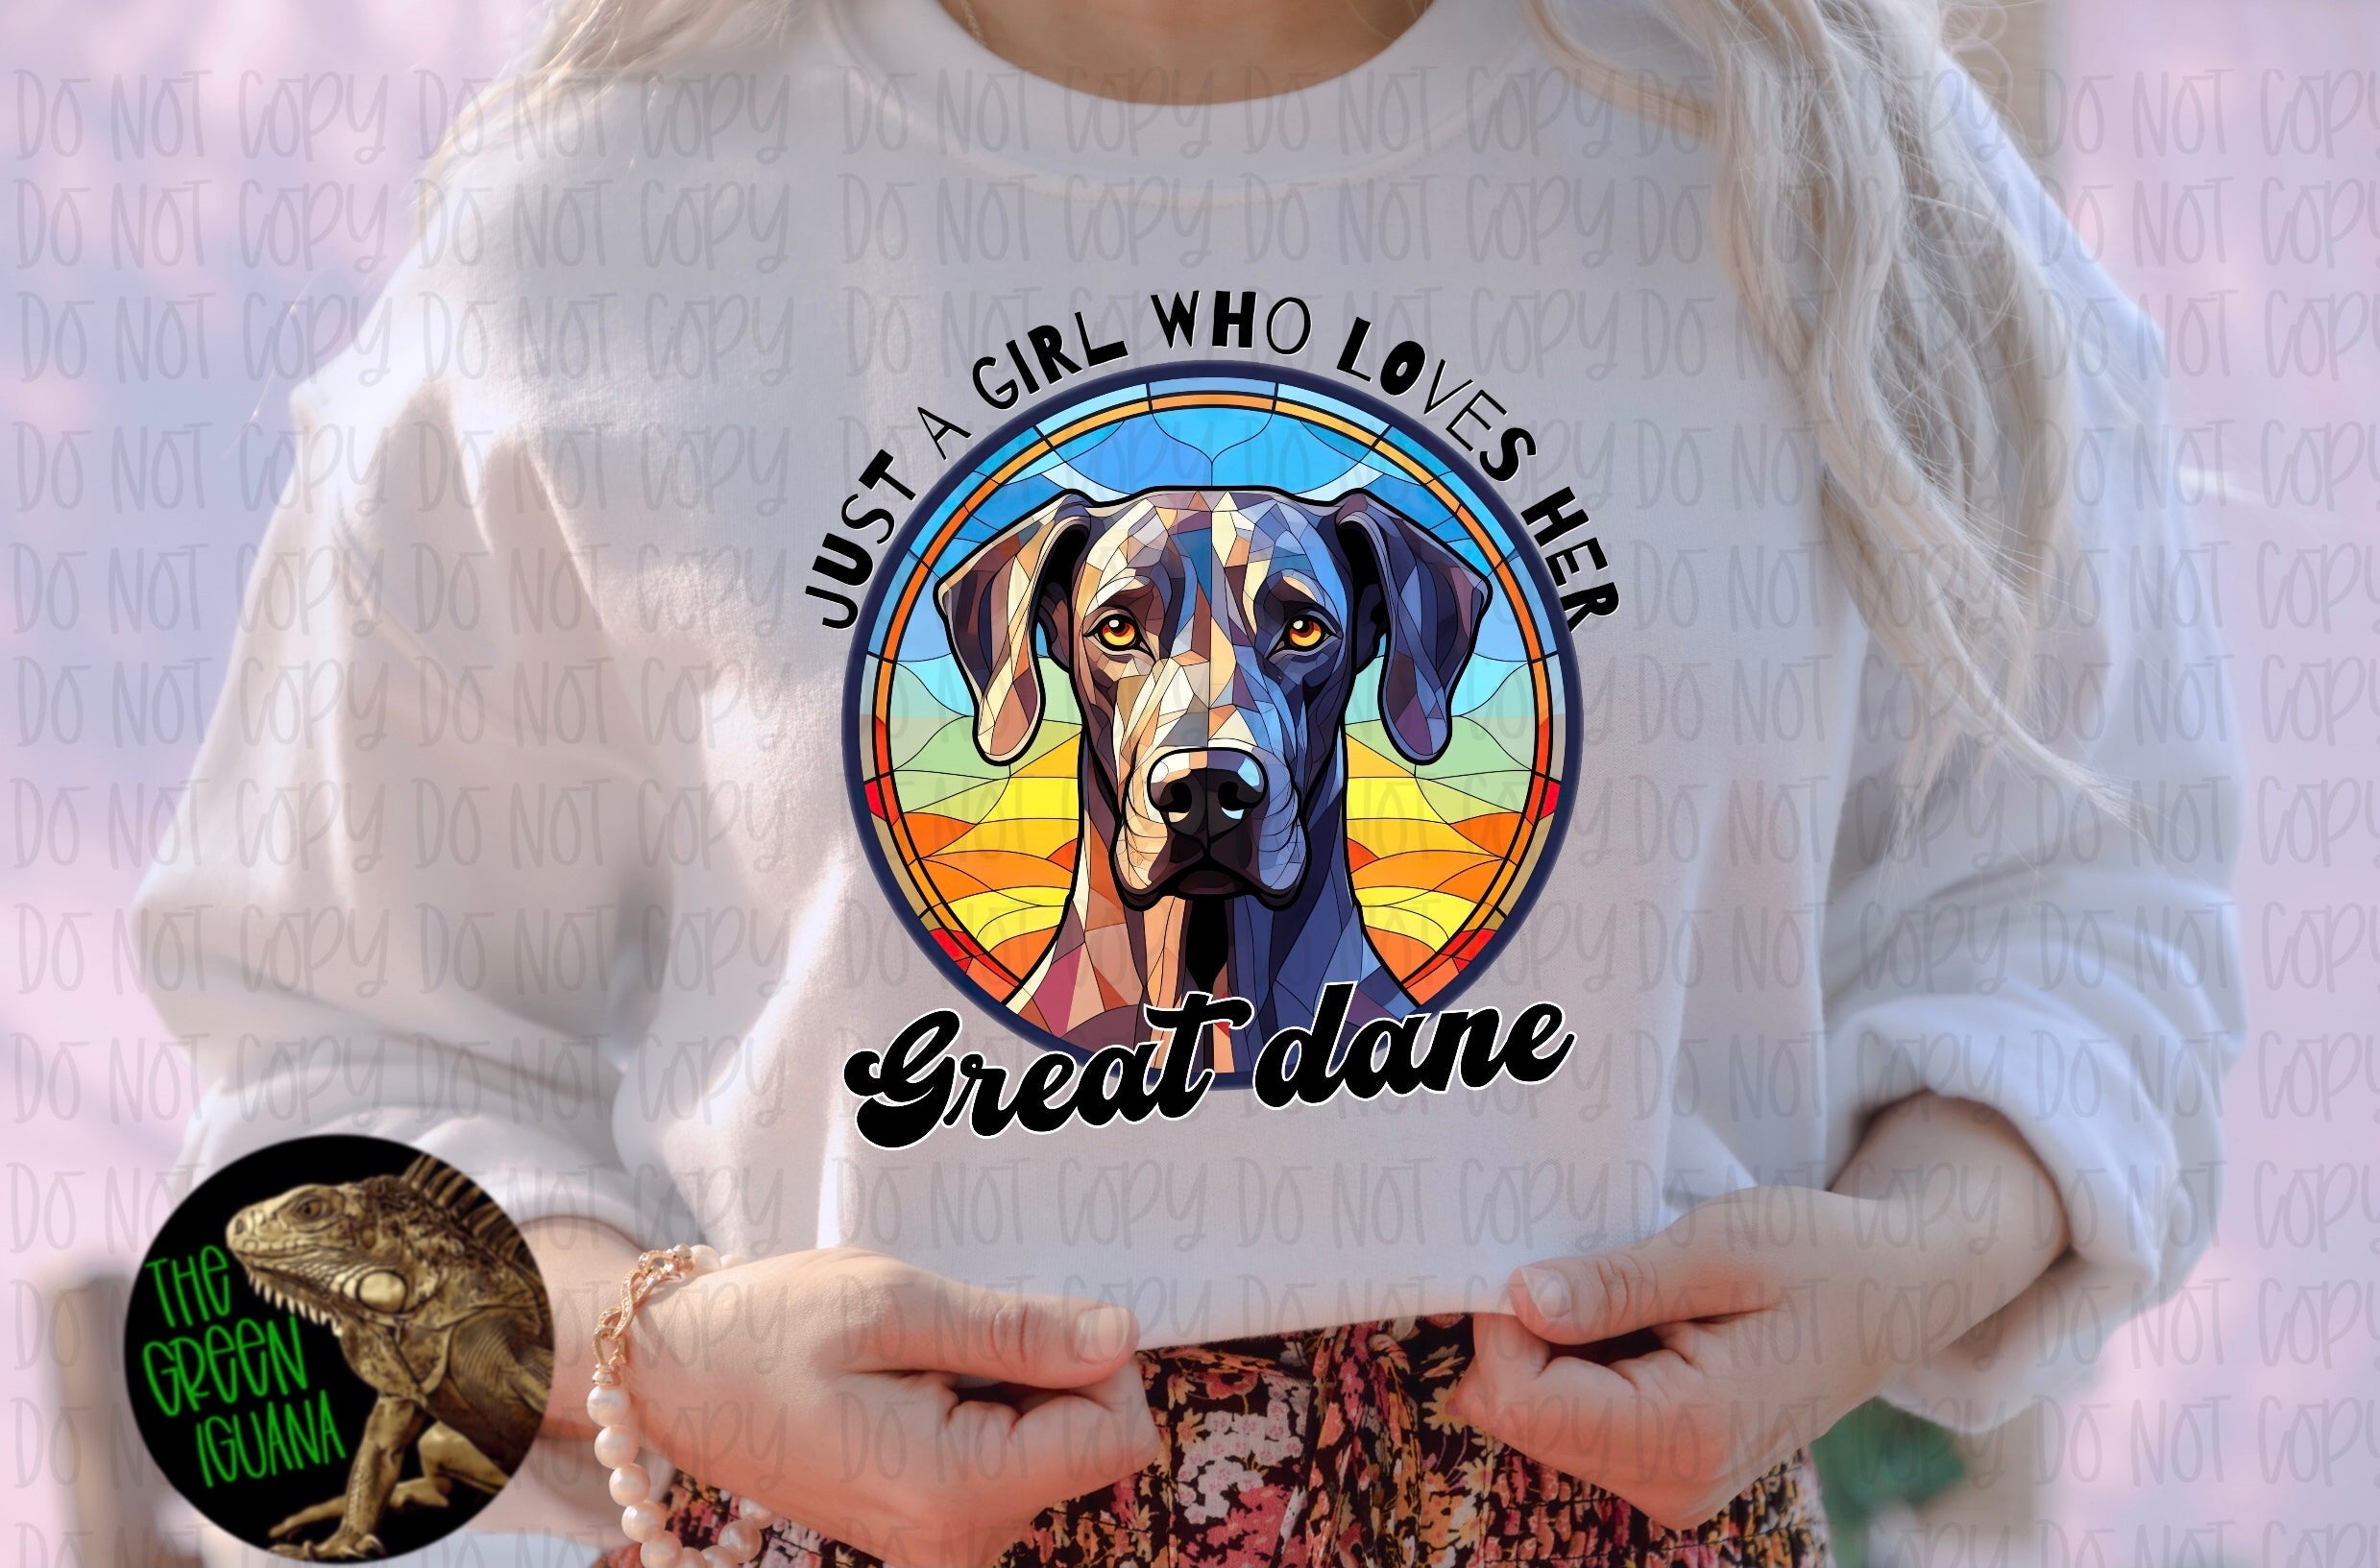 Just a girl who loves her Great dane